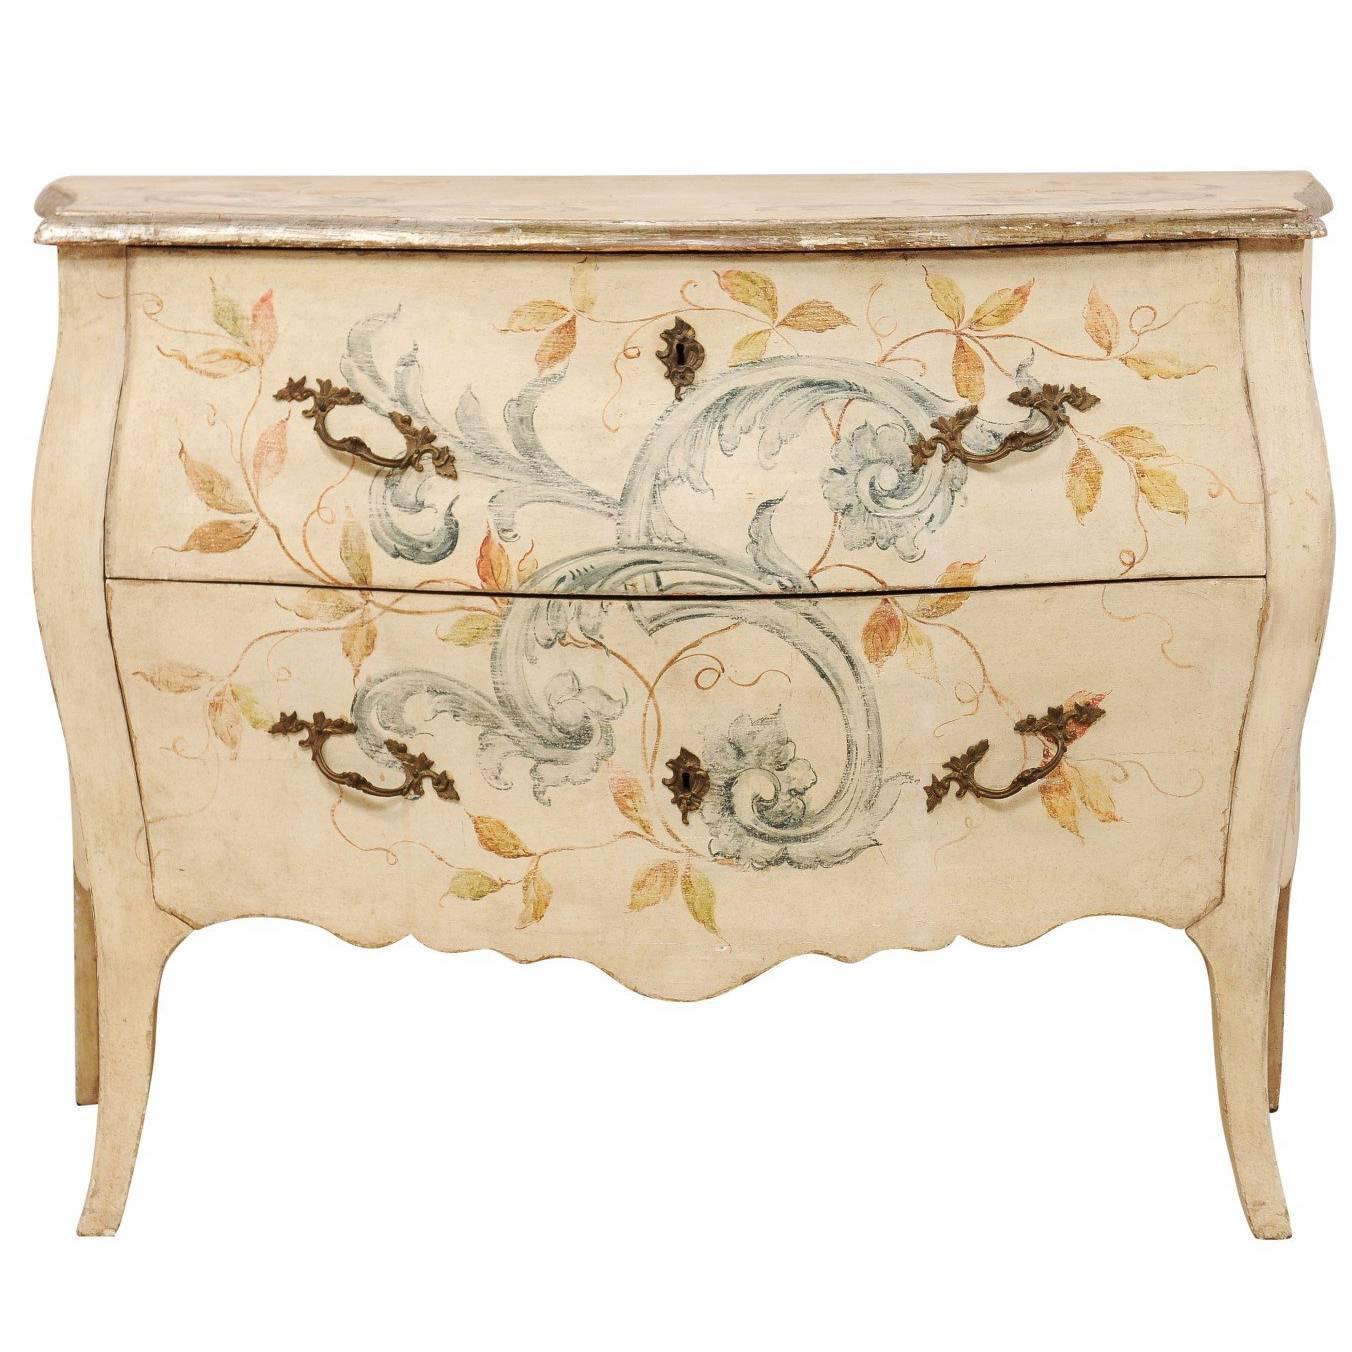 Italian Hand-Painted Early 20th Century Bombé Chest of Drawers in Cream Color